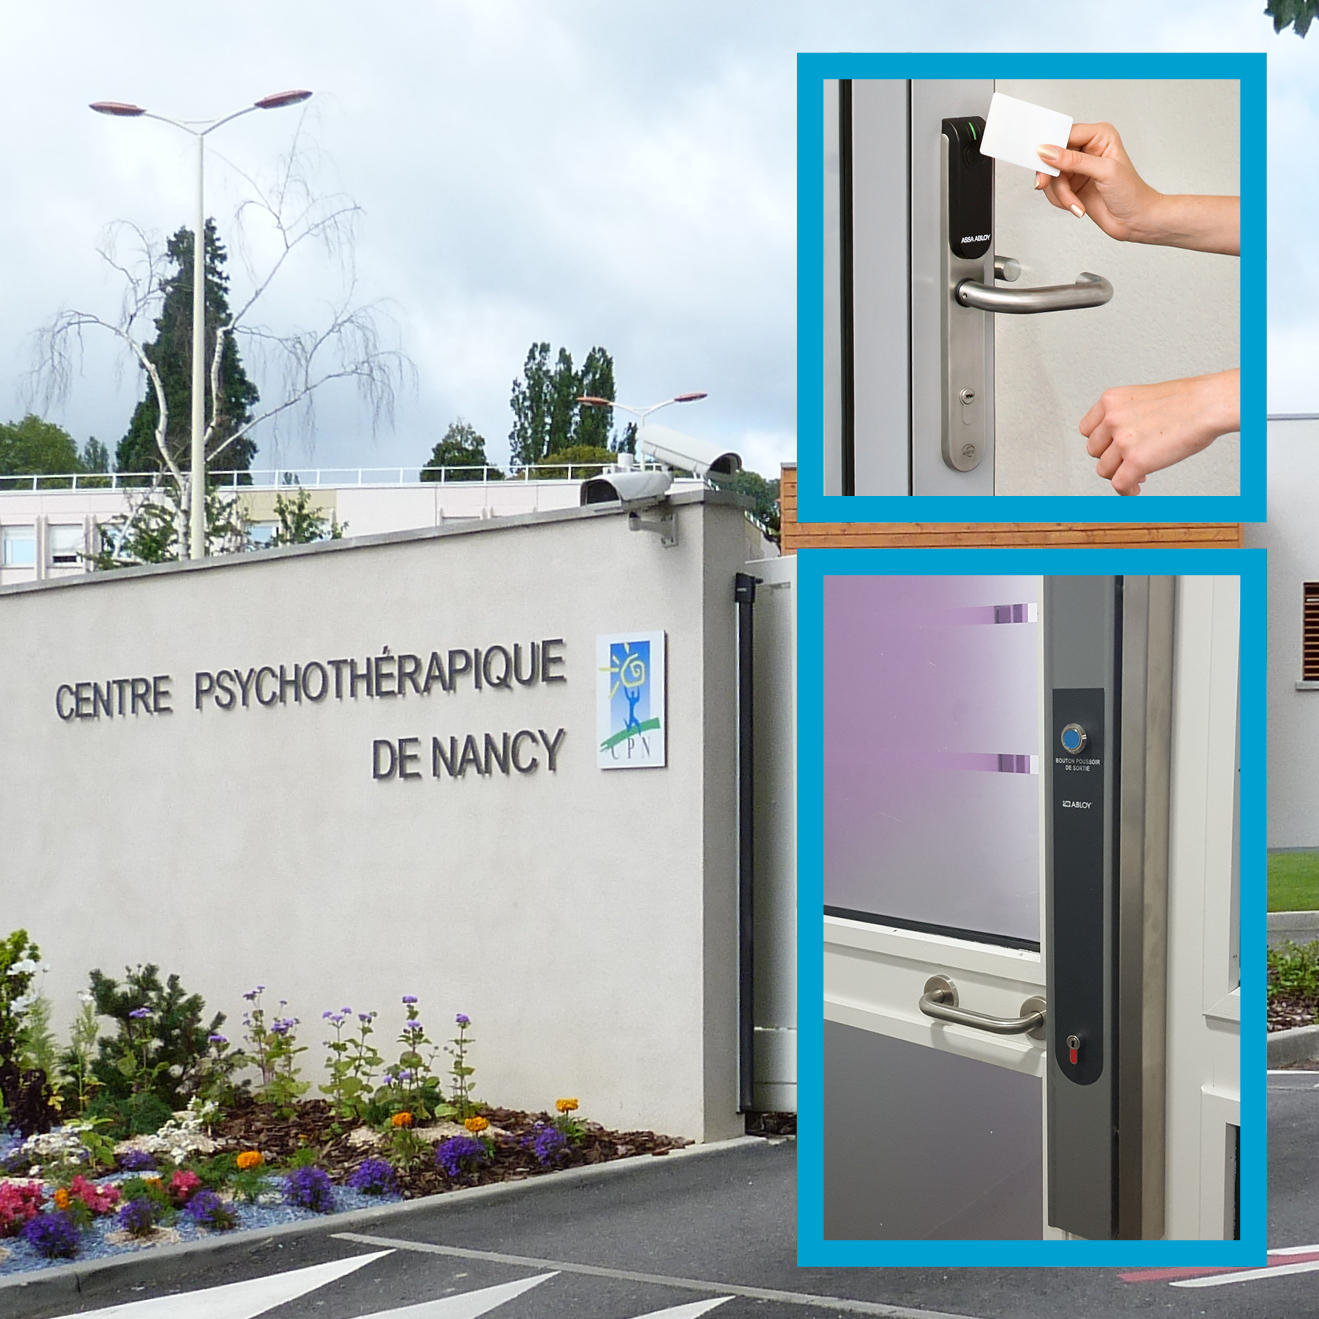 Access control from Aperio